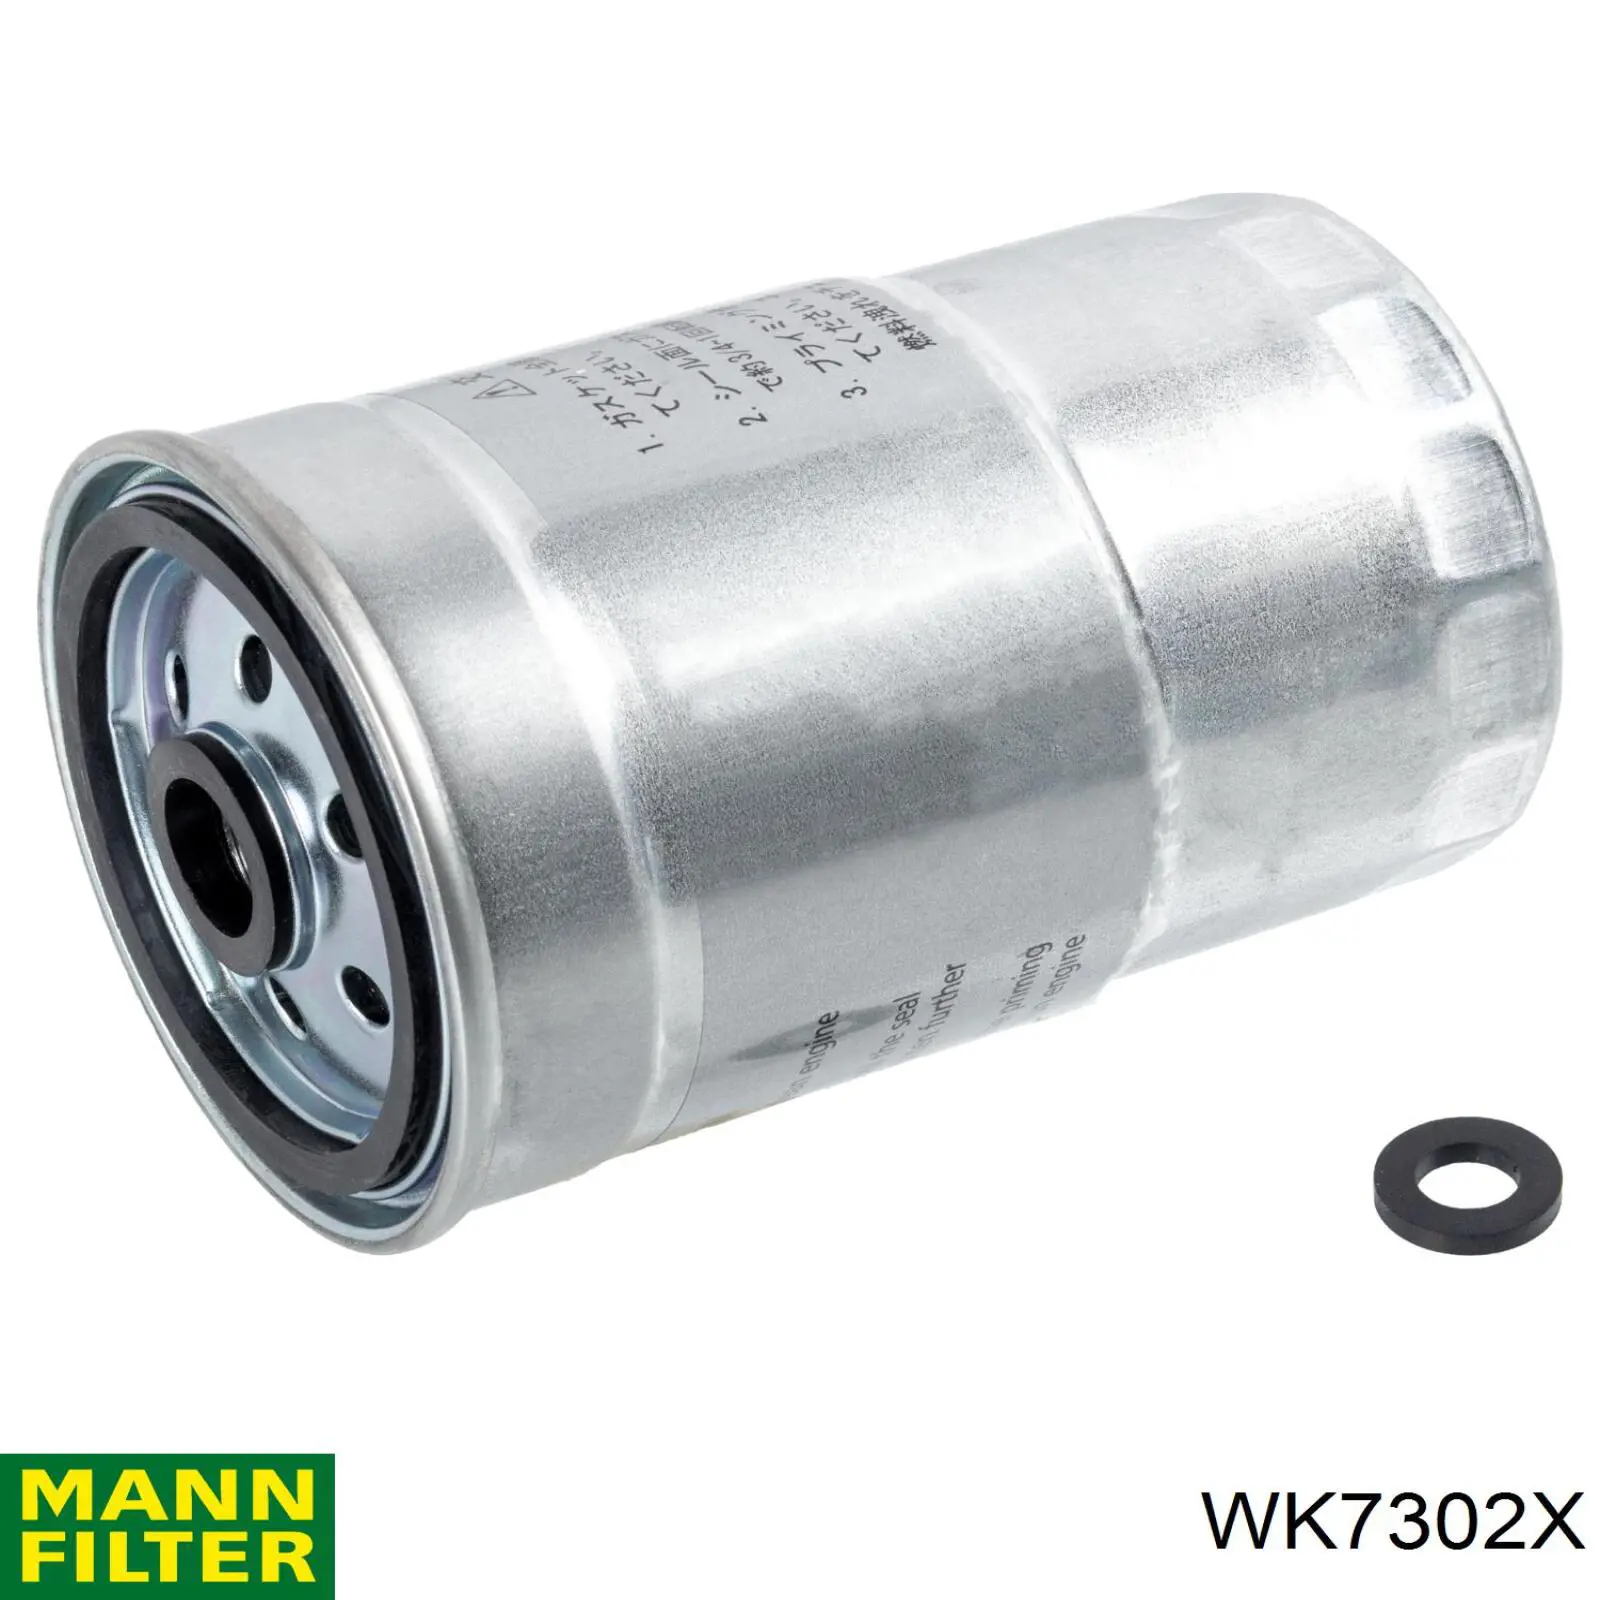 WK7302X Mann-Filter filtro combustible